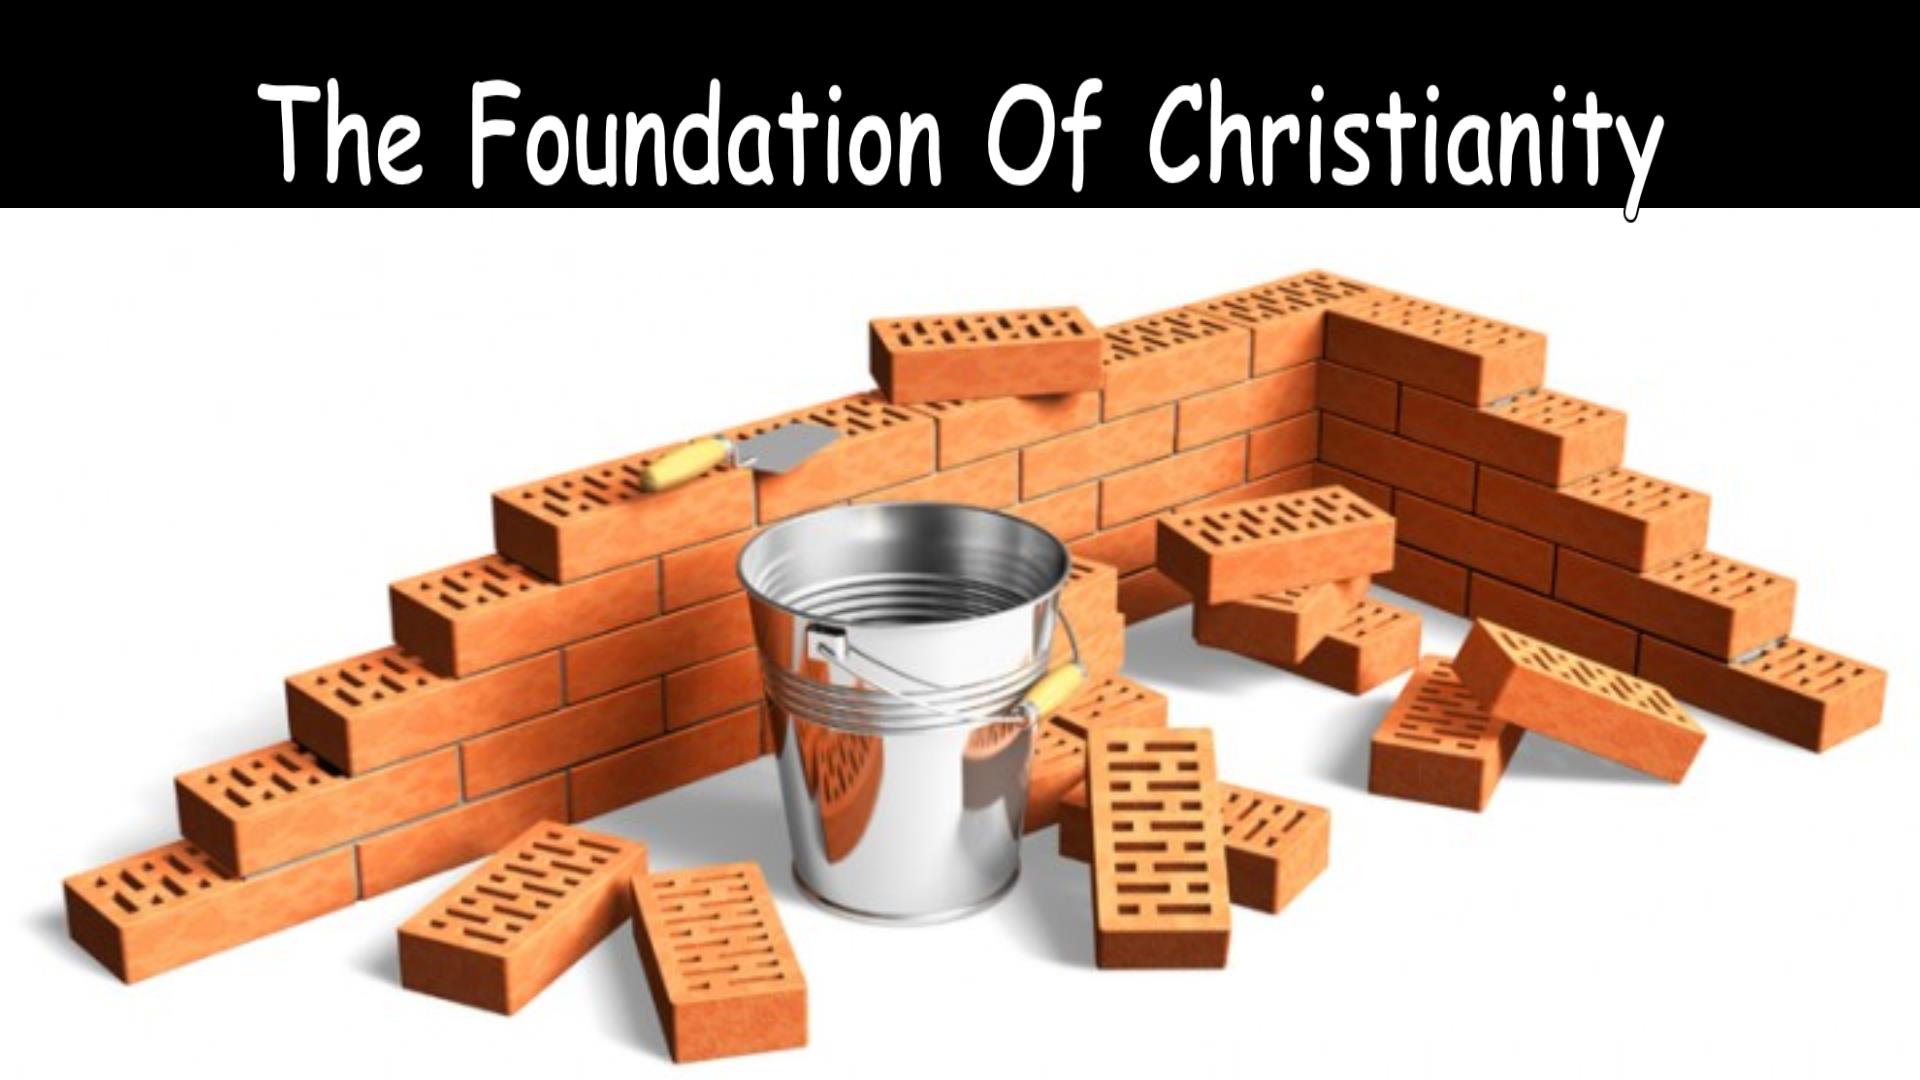 The Foundation of Christianity